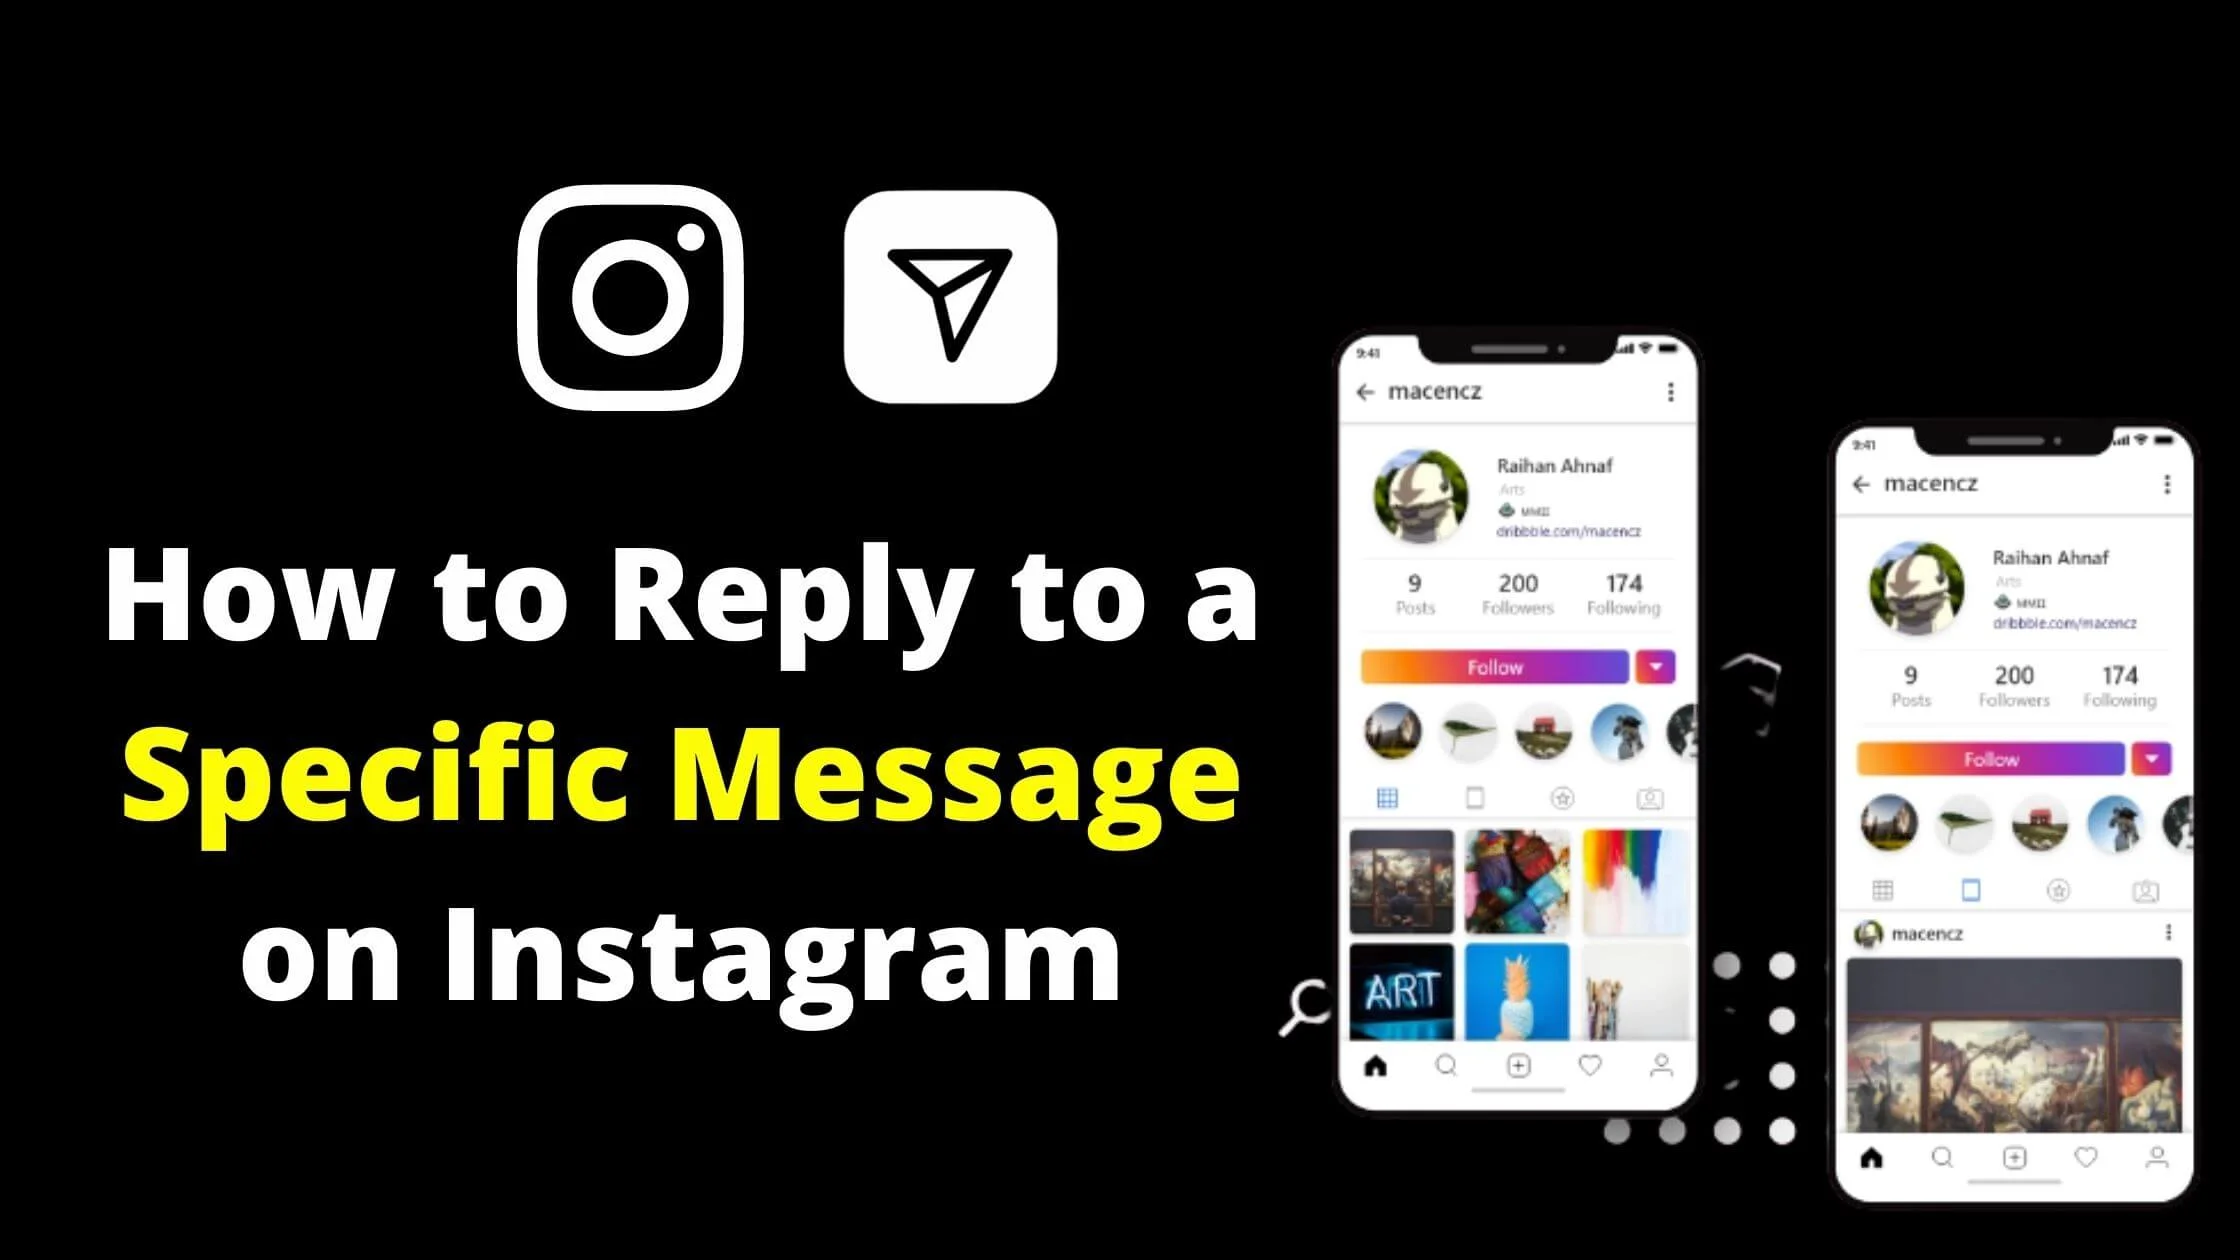 Reply to a Specific Message on Instagram